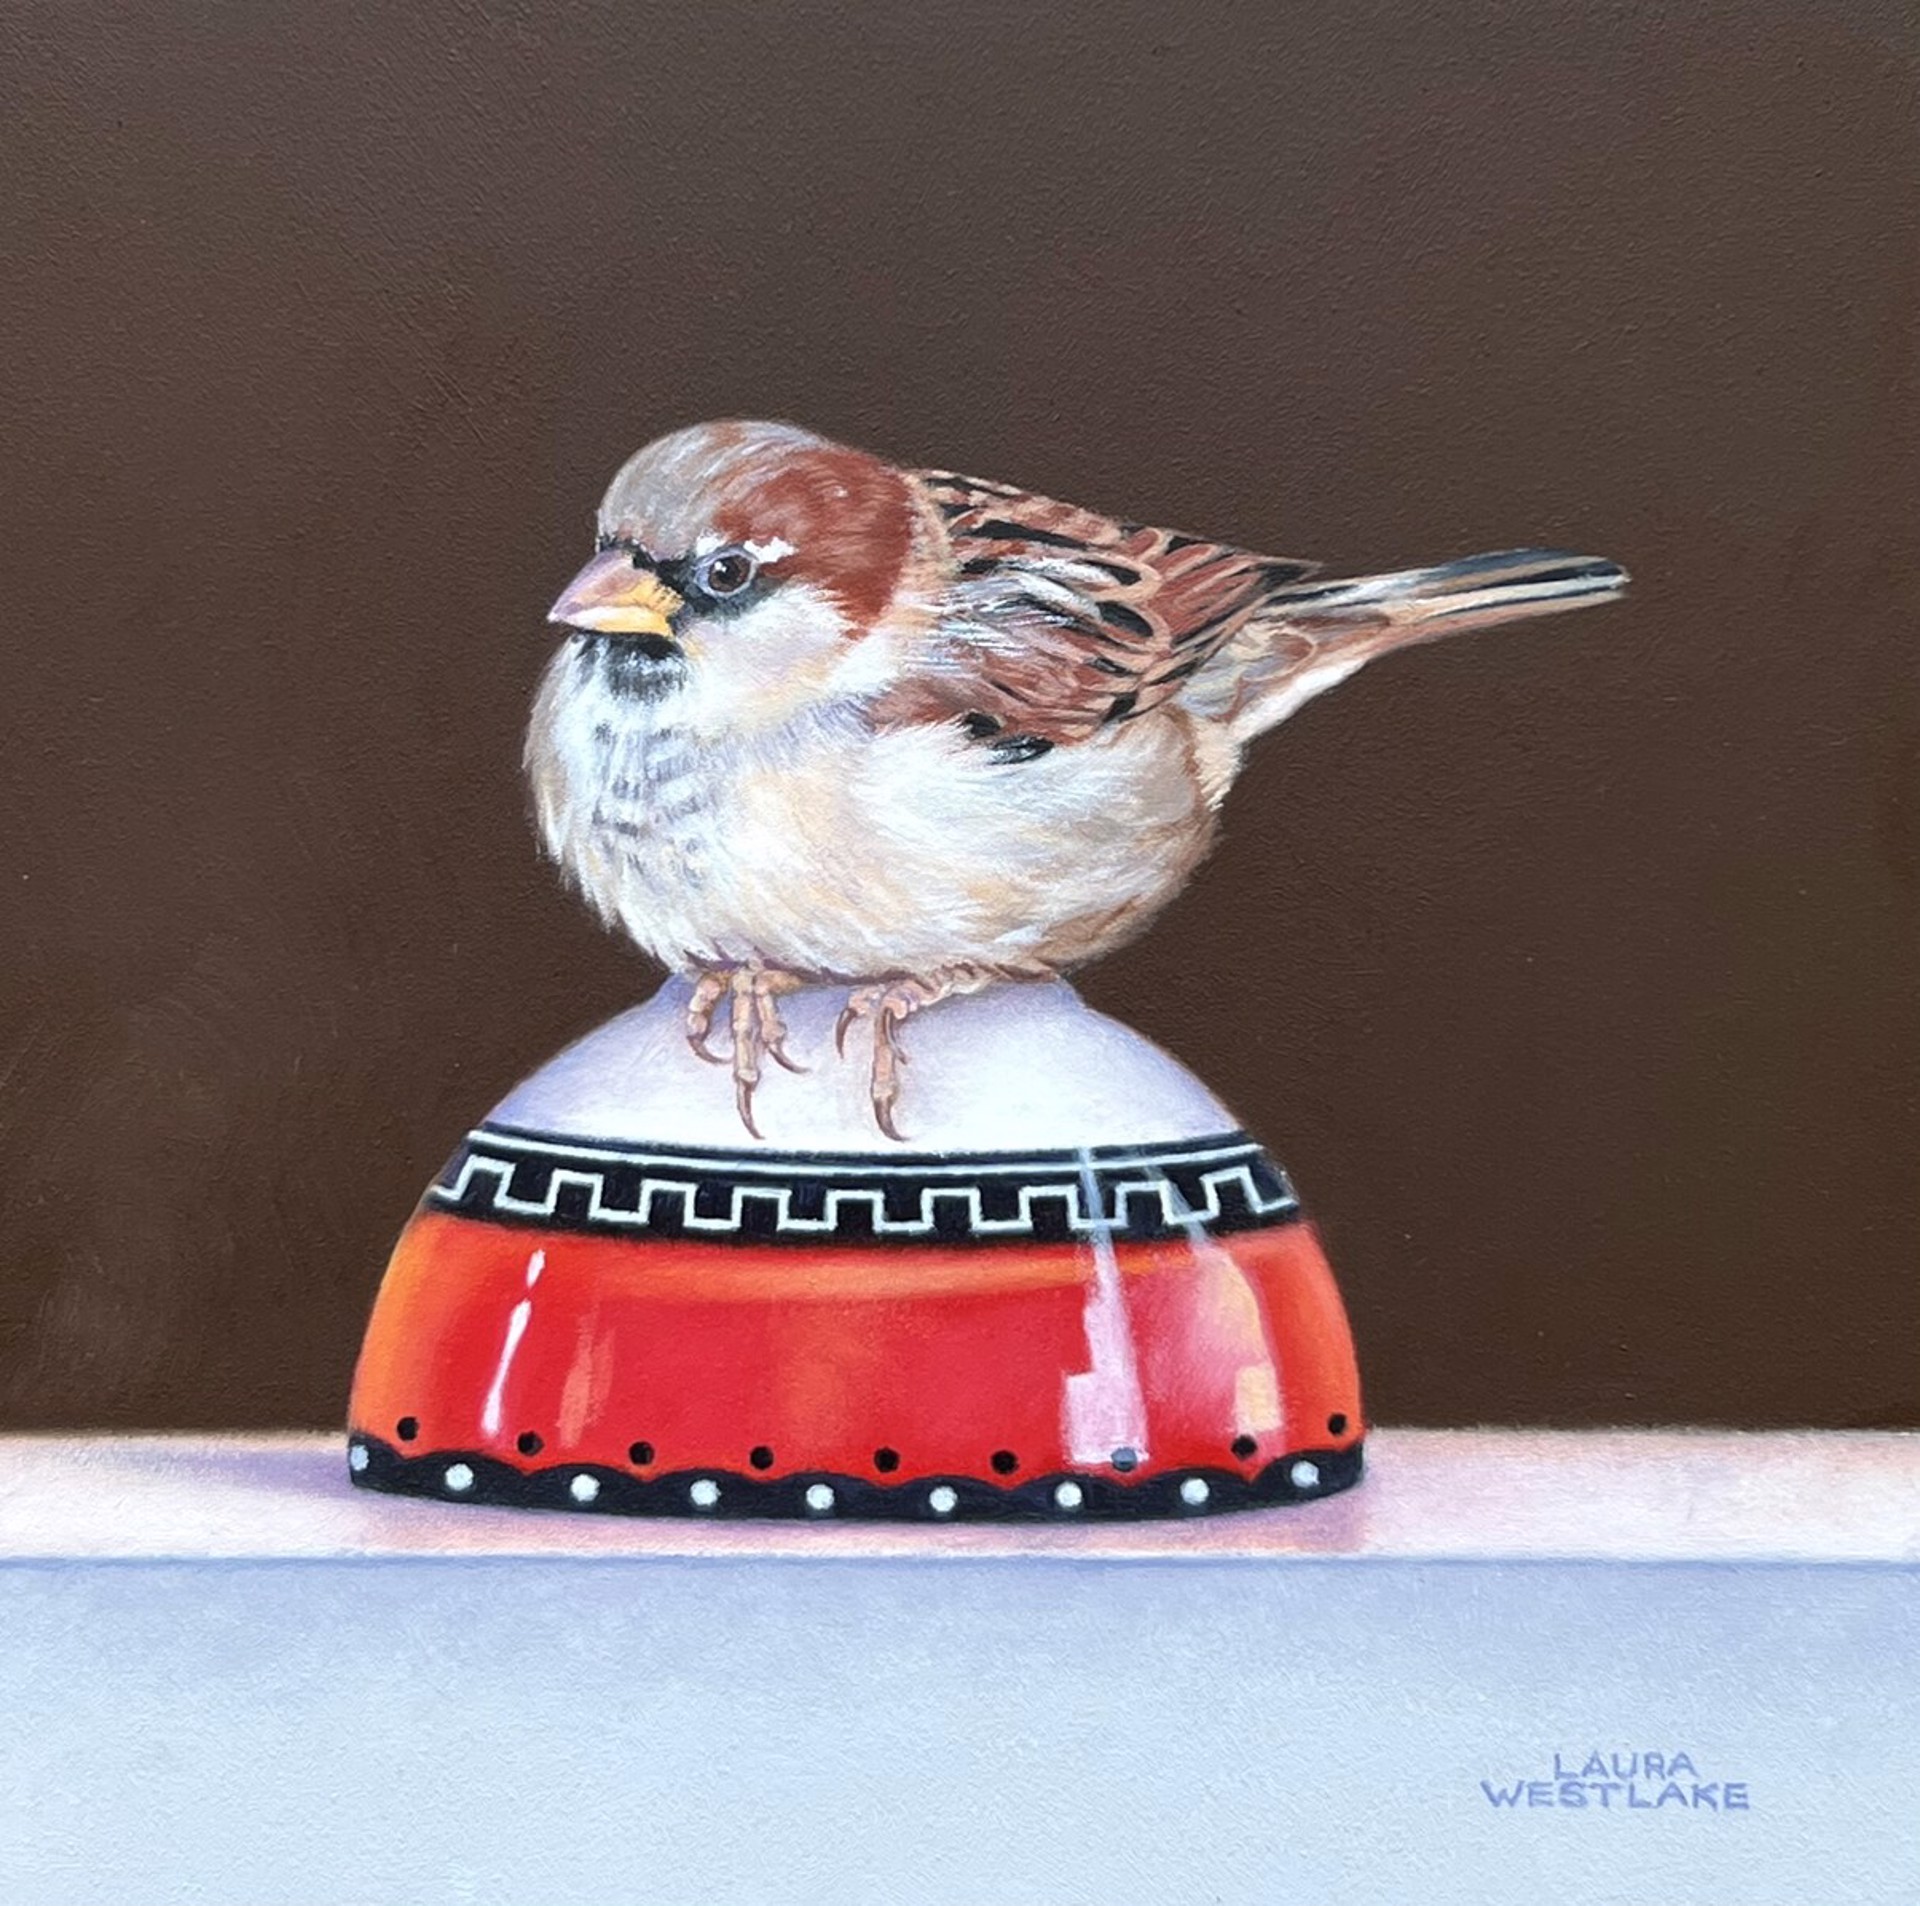 Circus Sparrow by Laura Westlake